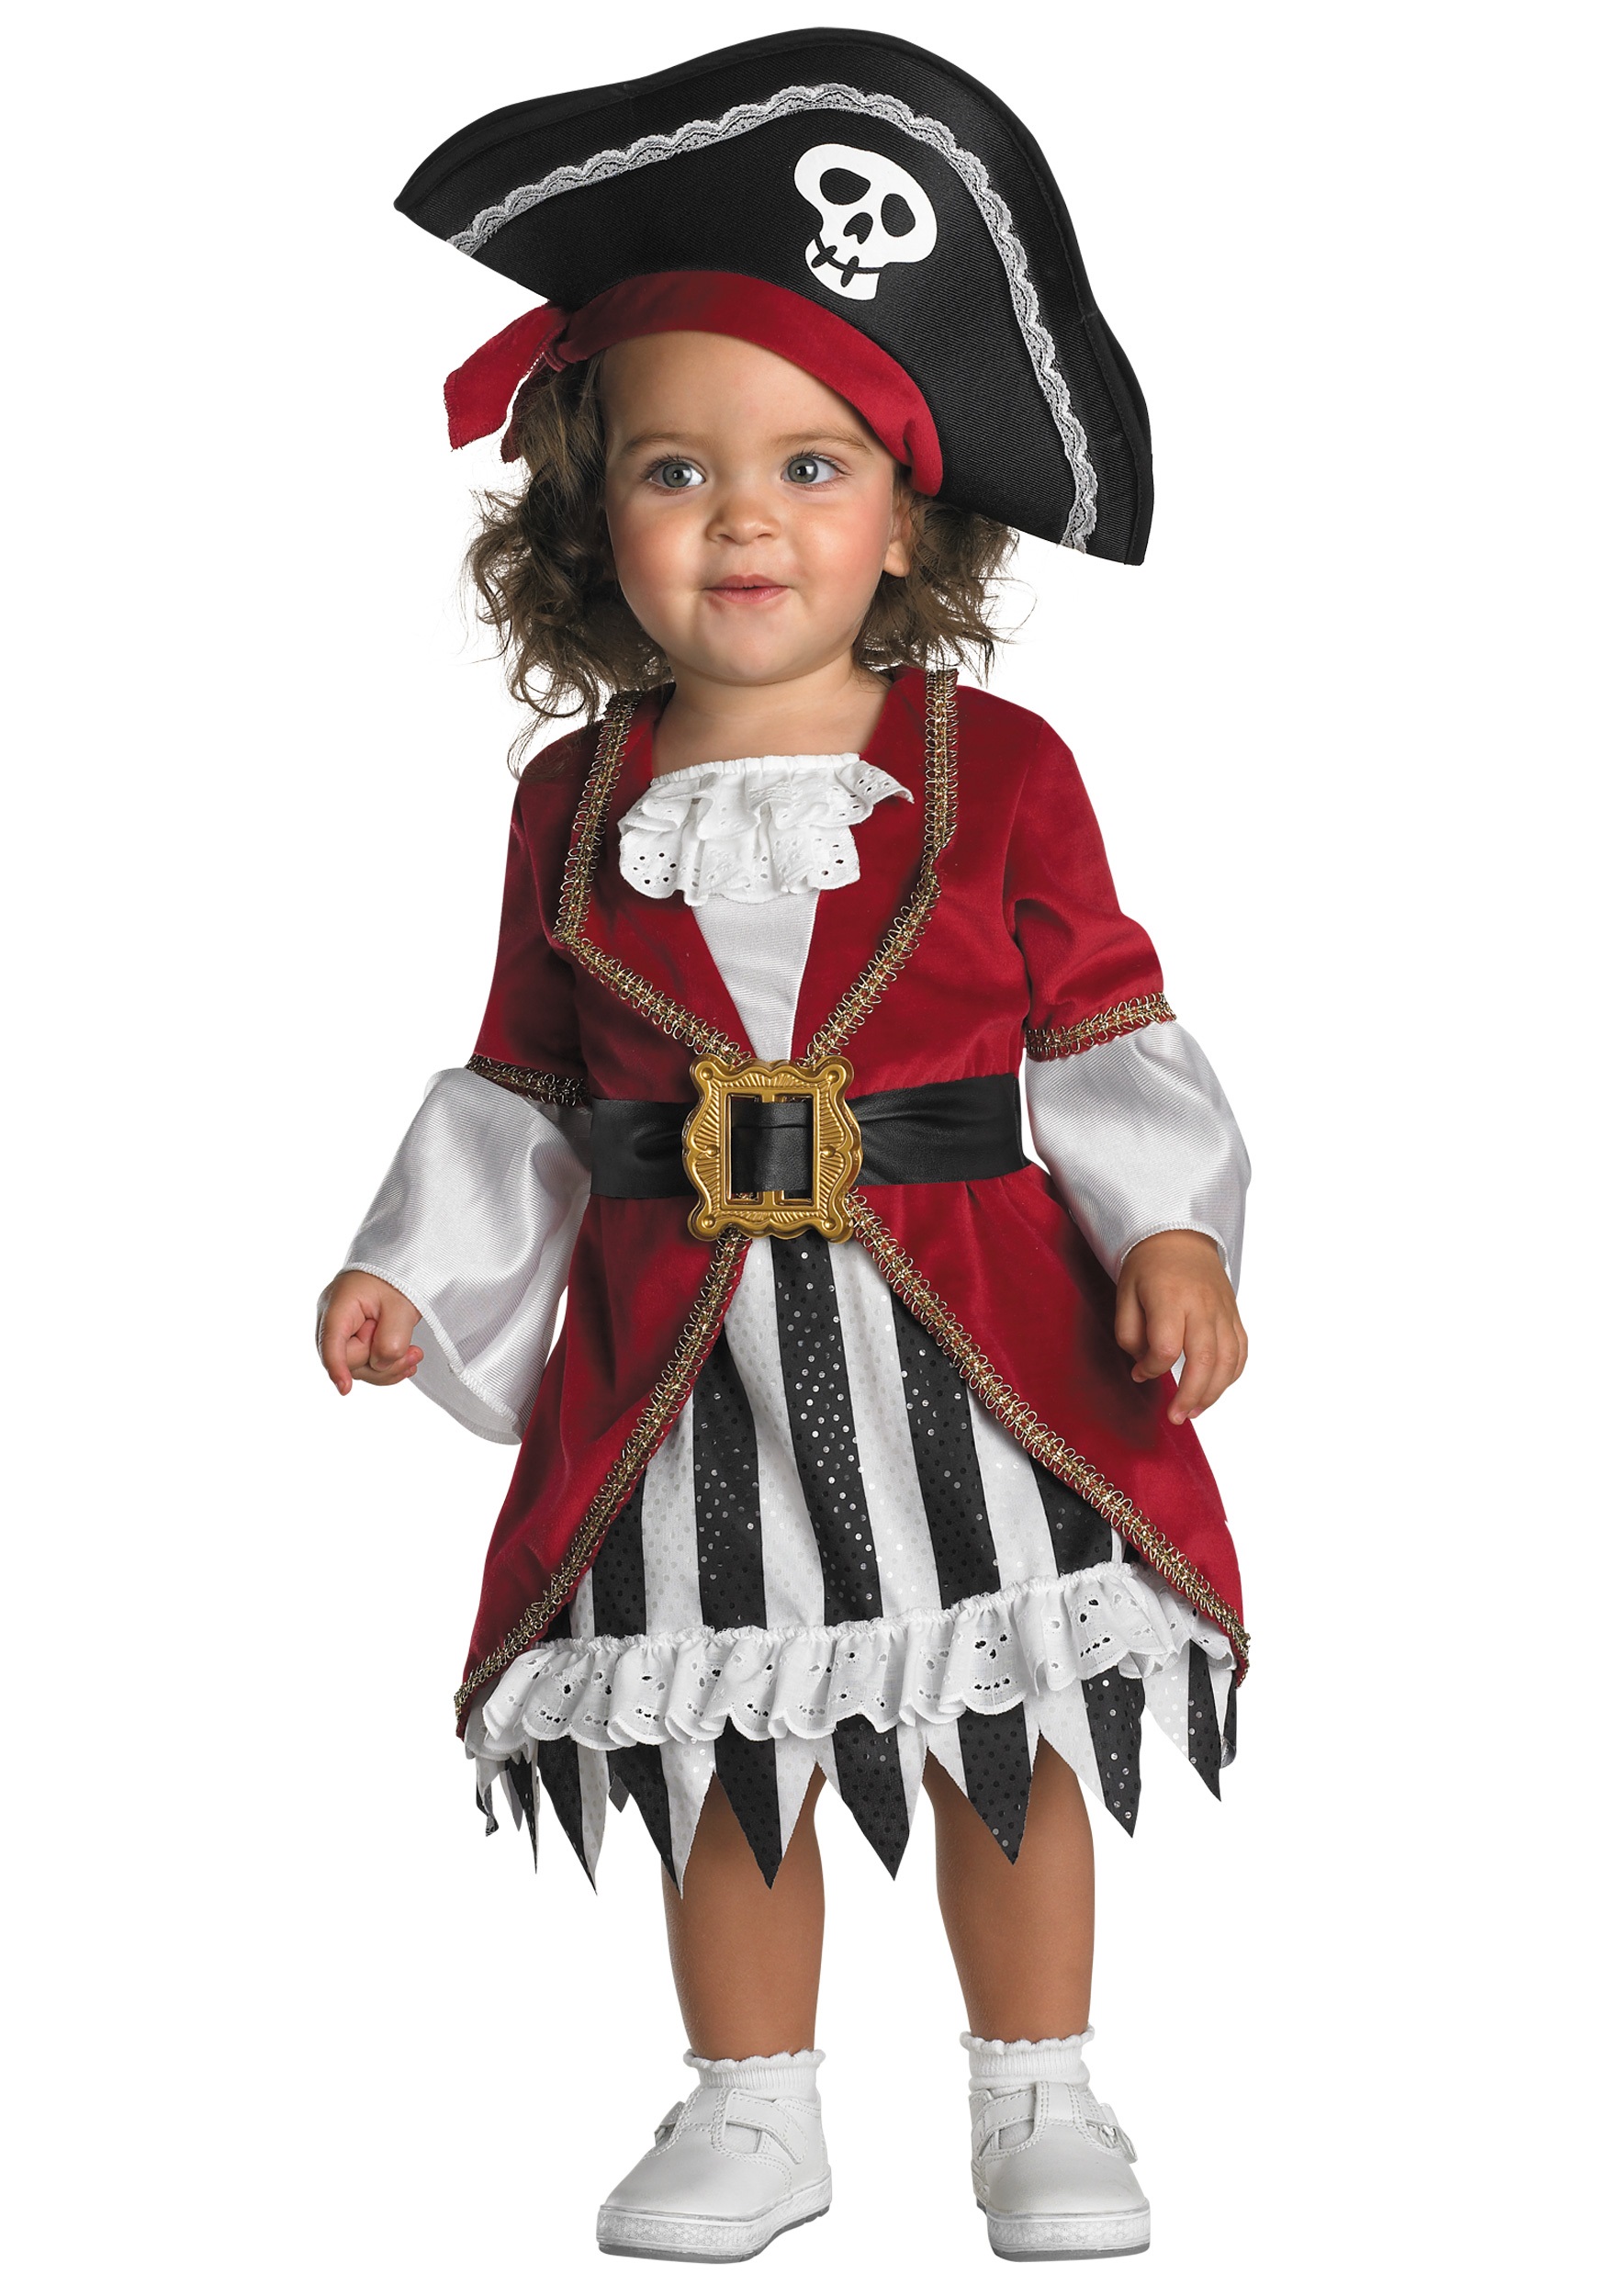 Photos - Fancy Dress Toddler Disguise Pirate Queen  Costume Red DI1764 